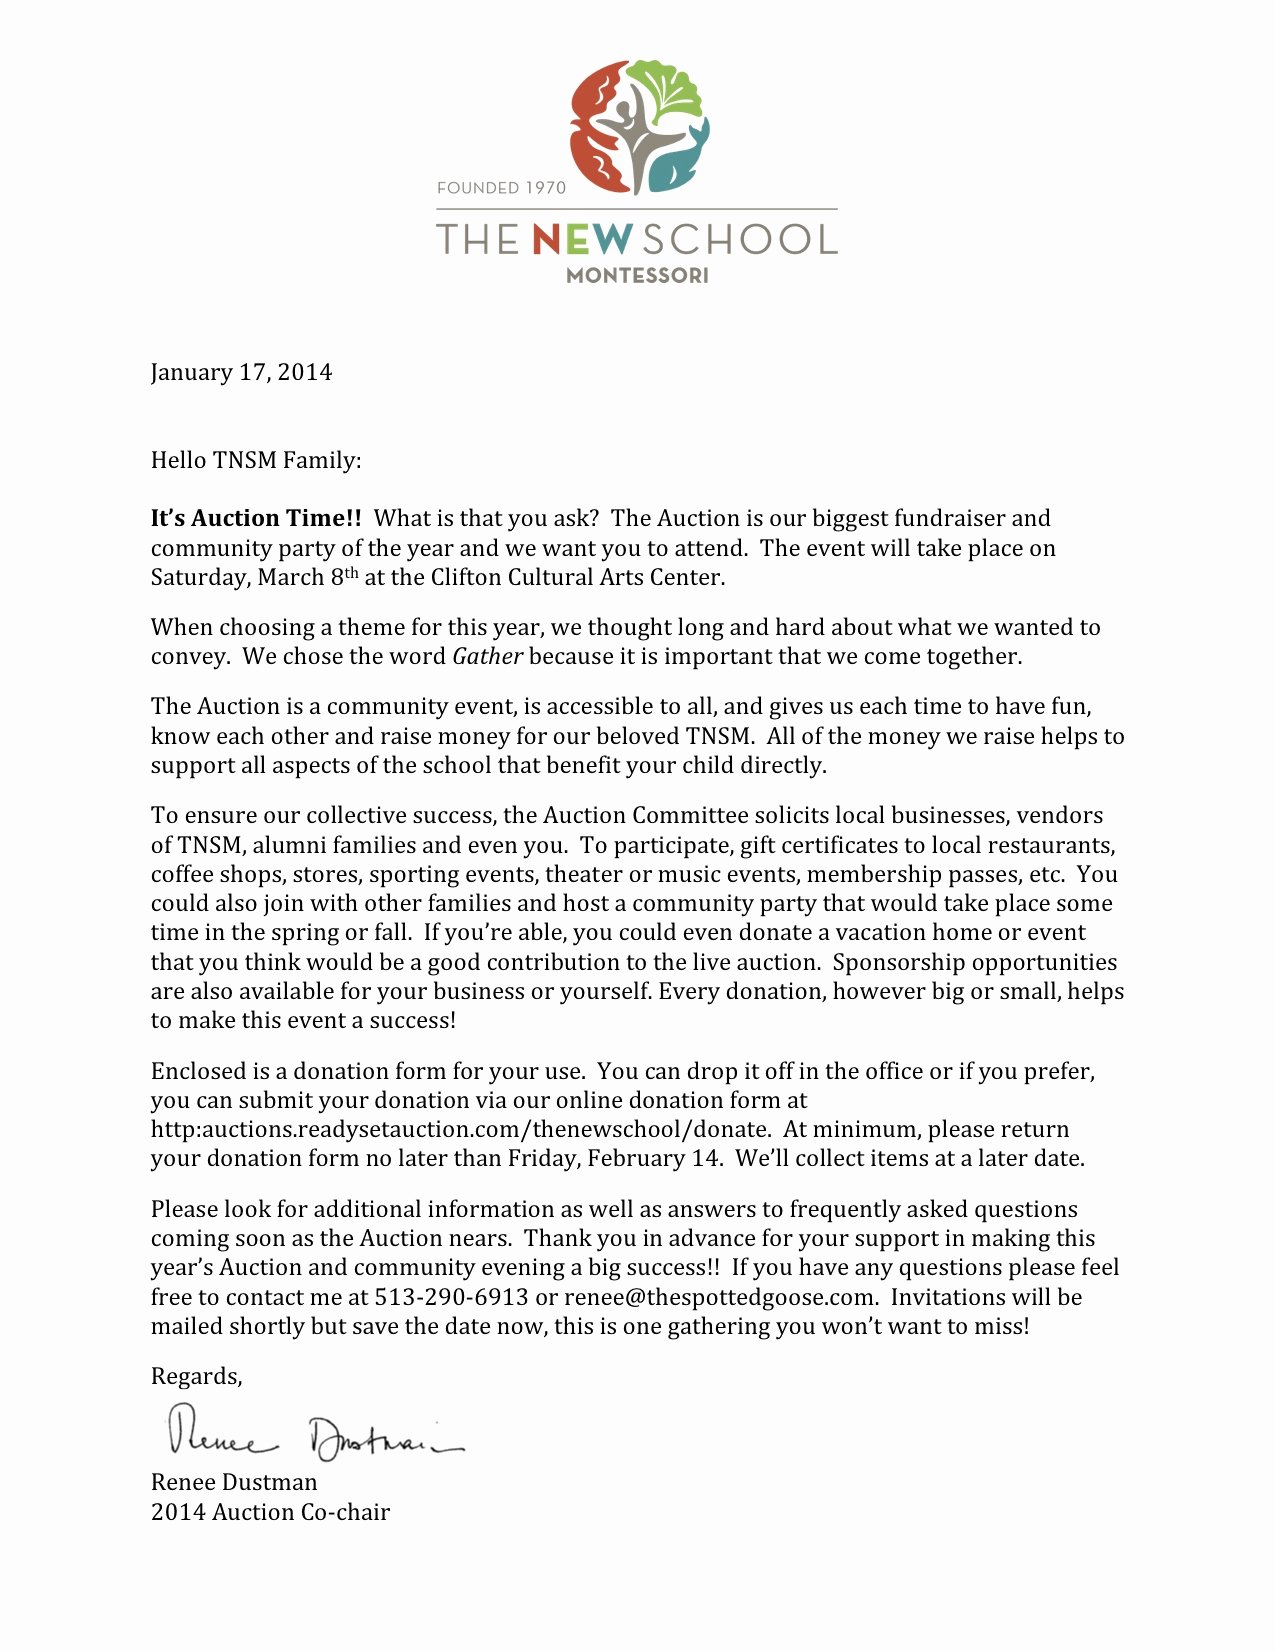 Mission Trip Donation Letter Best Of Auction Letter and Donation form the New School Montessori